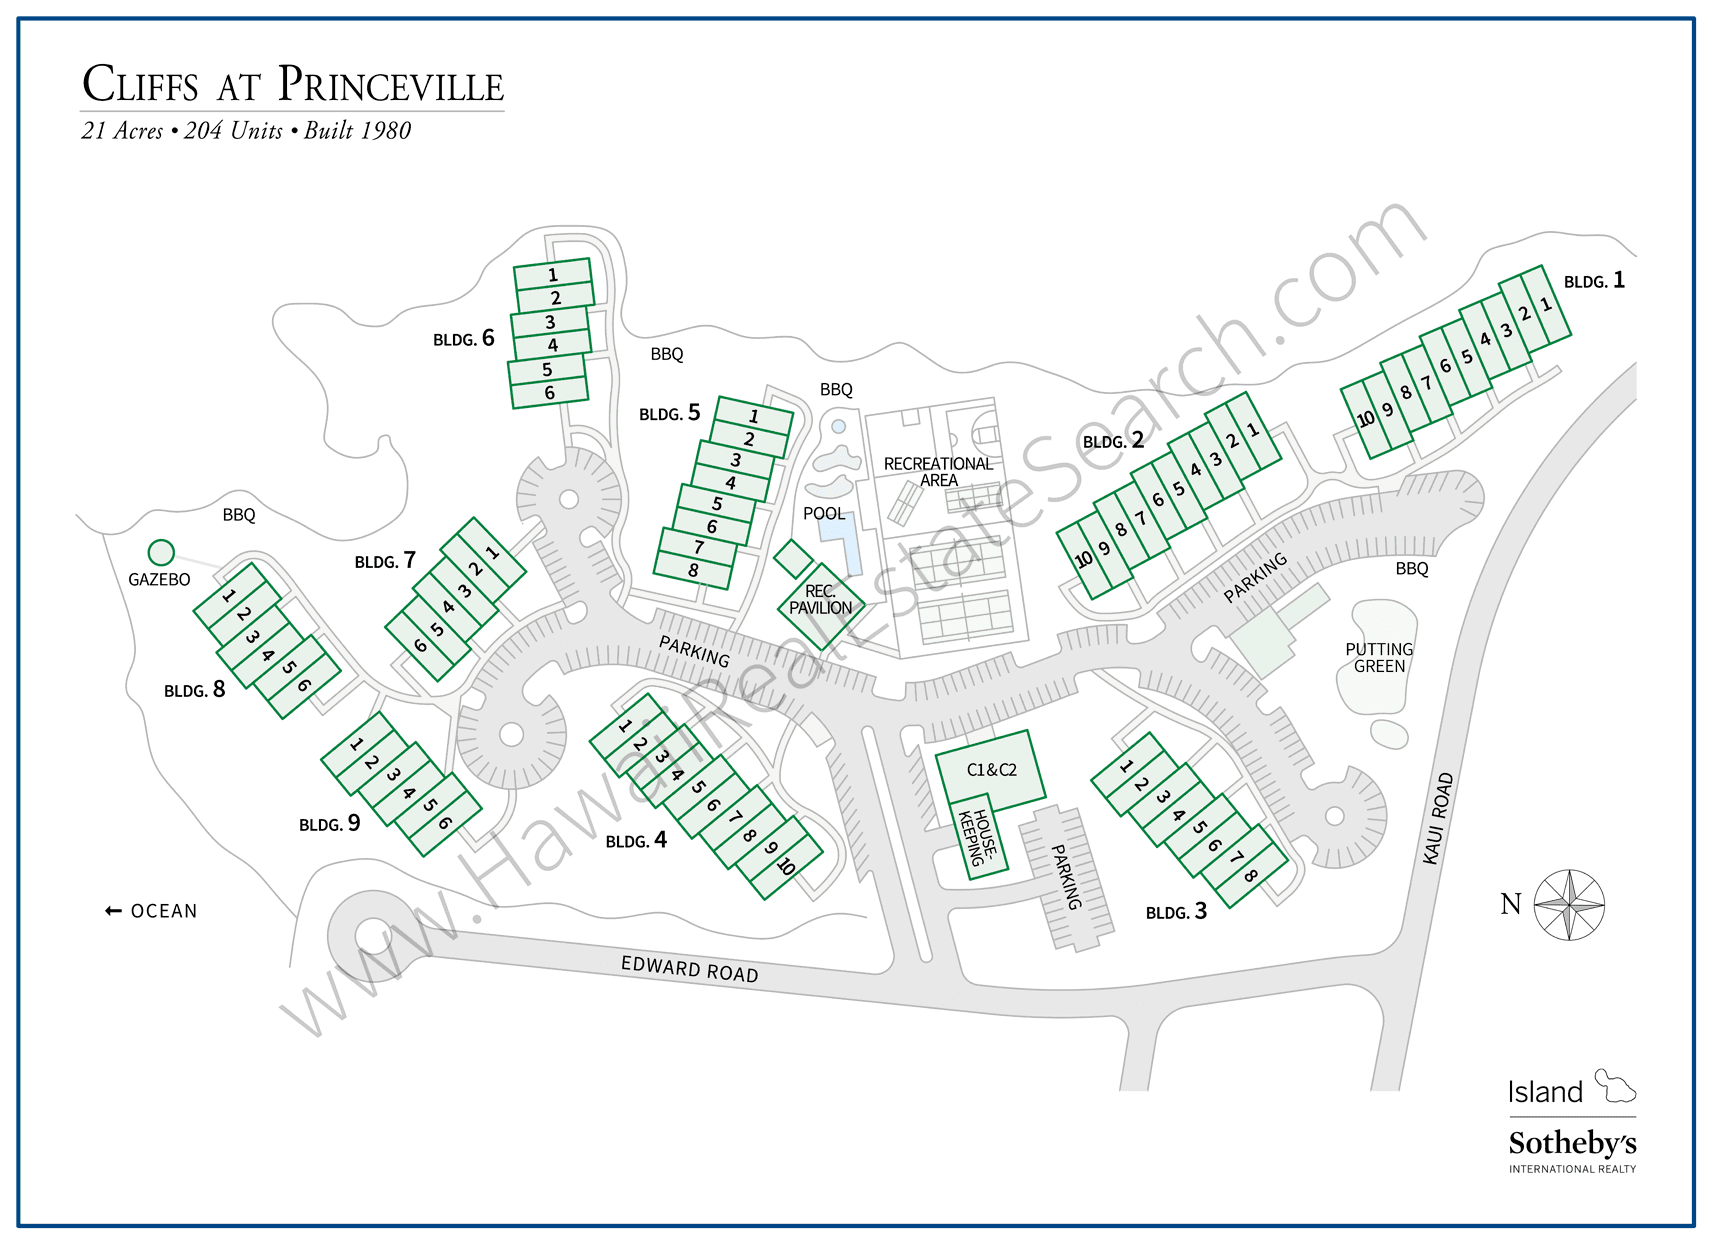 Cliffs at Princeville Property Map Updated